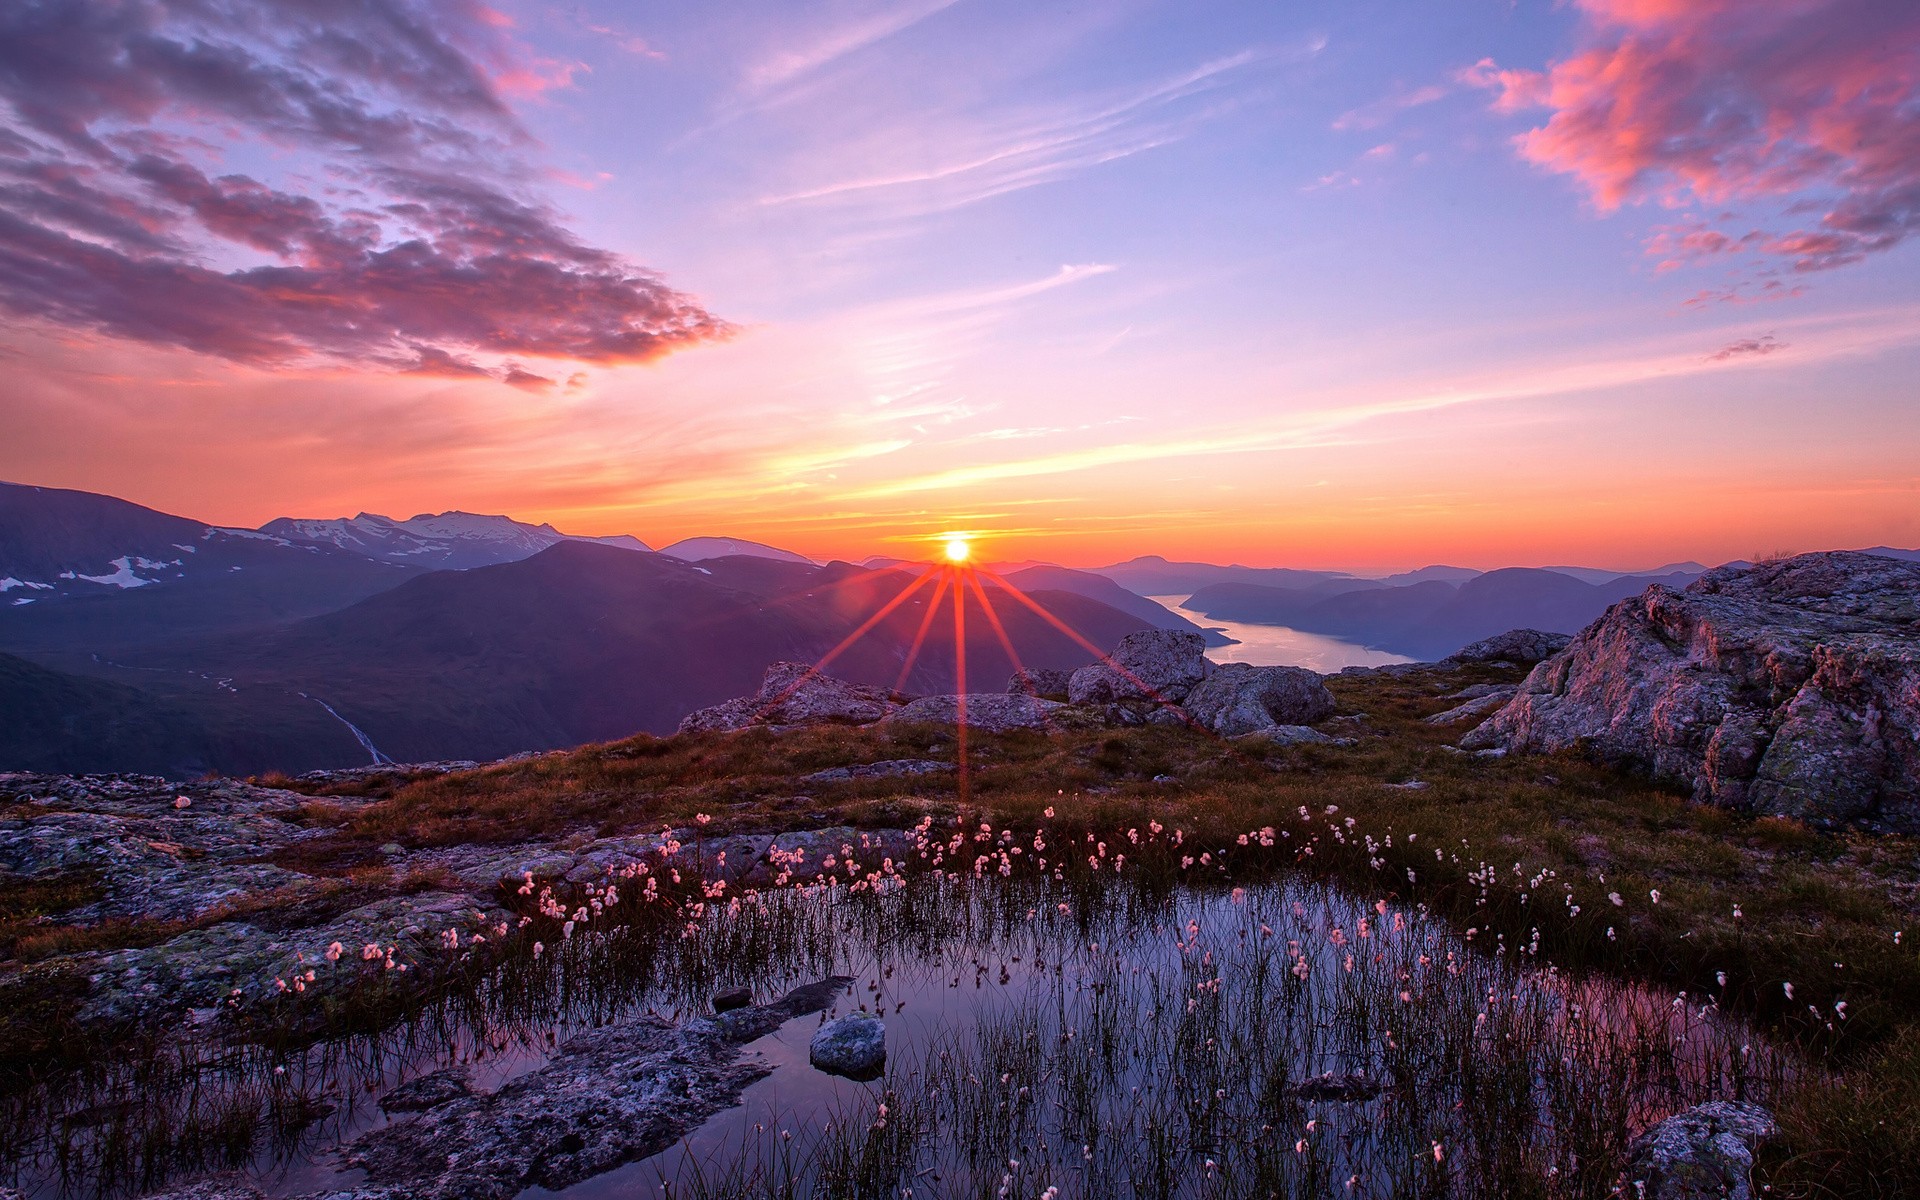 General 1920x1200 landscape sunrise spring mountains lens flare sun rays sunlight outdoors nature sky